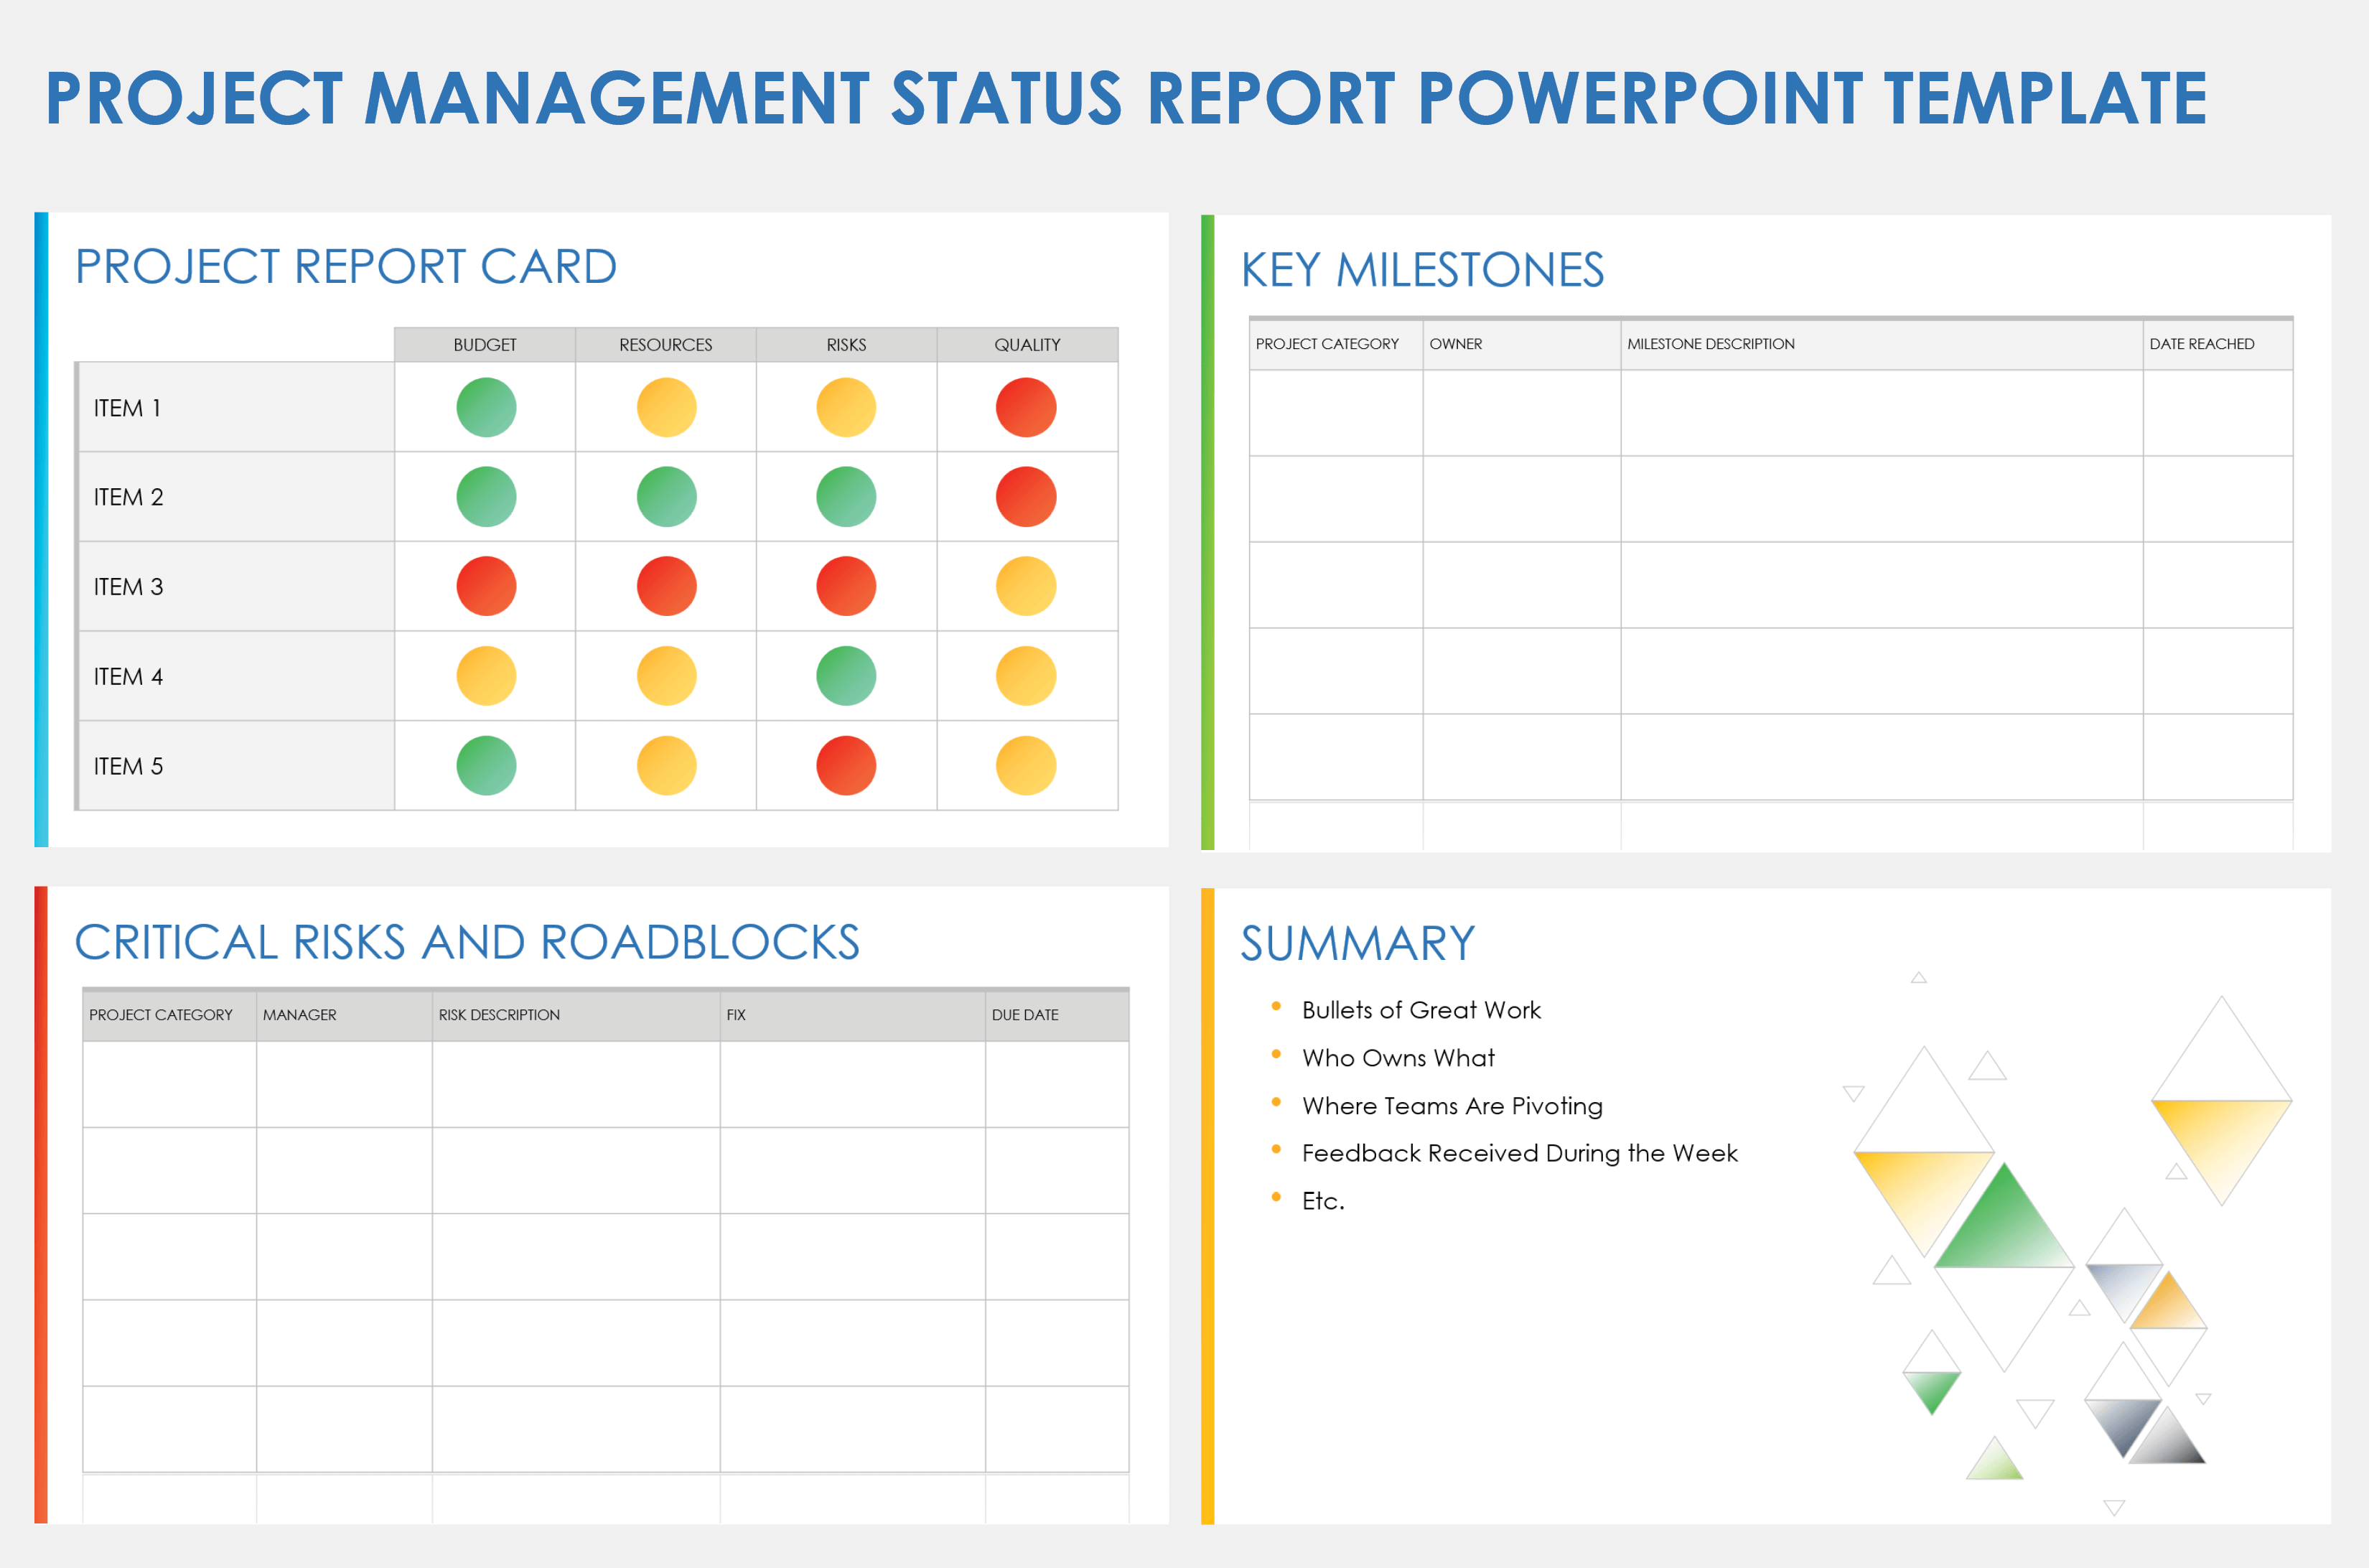 Project Management Status Report PowerPoint Template